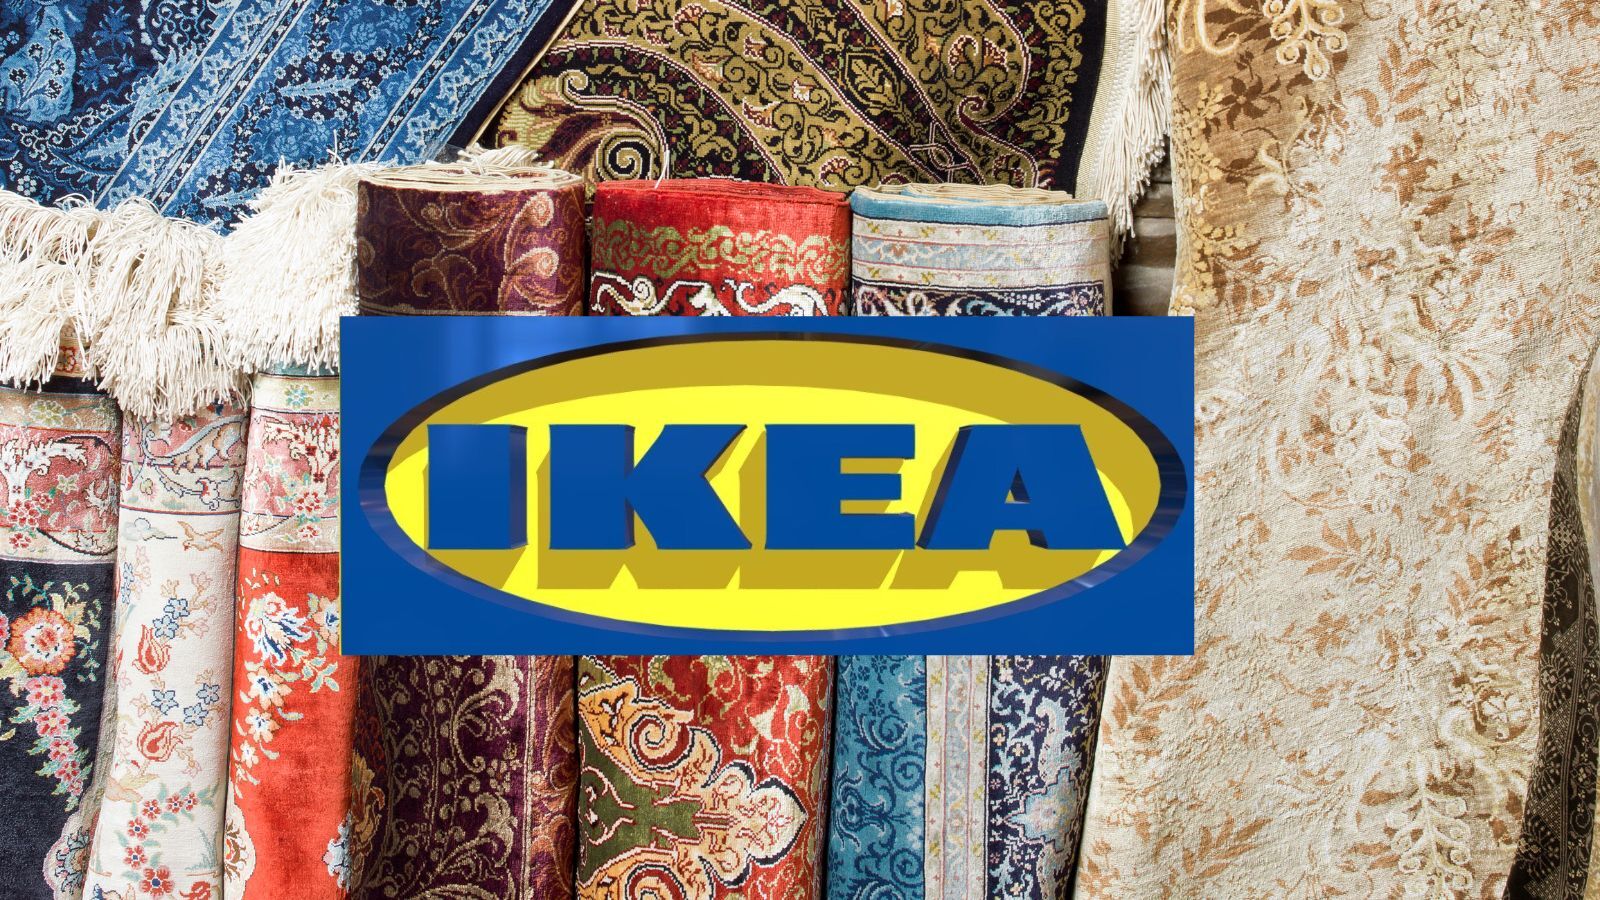 IKEA Rugs: How to Pick Them?